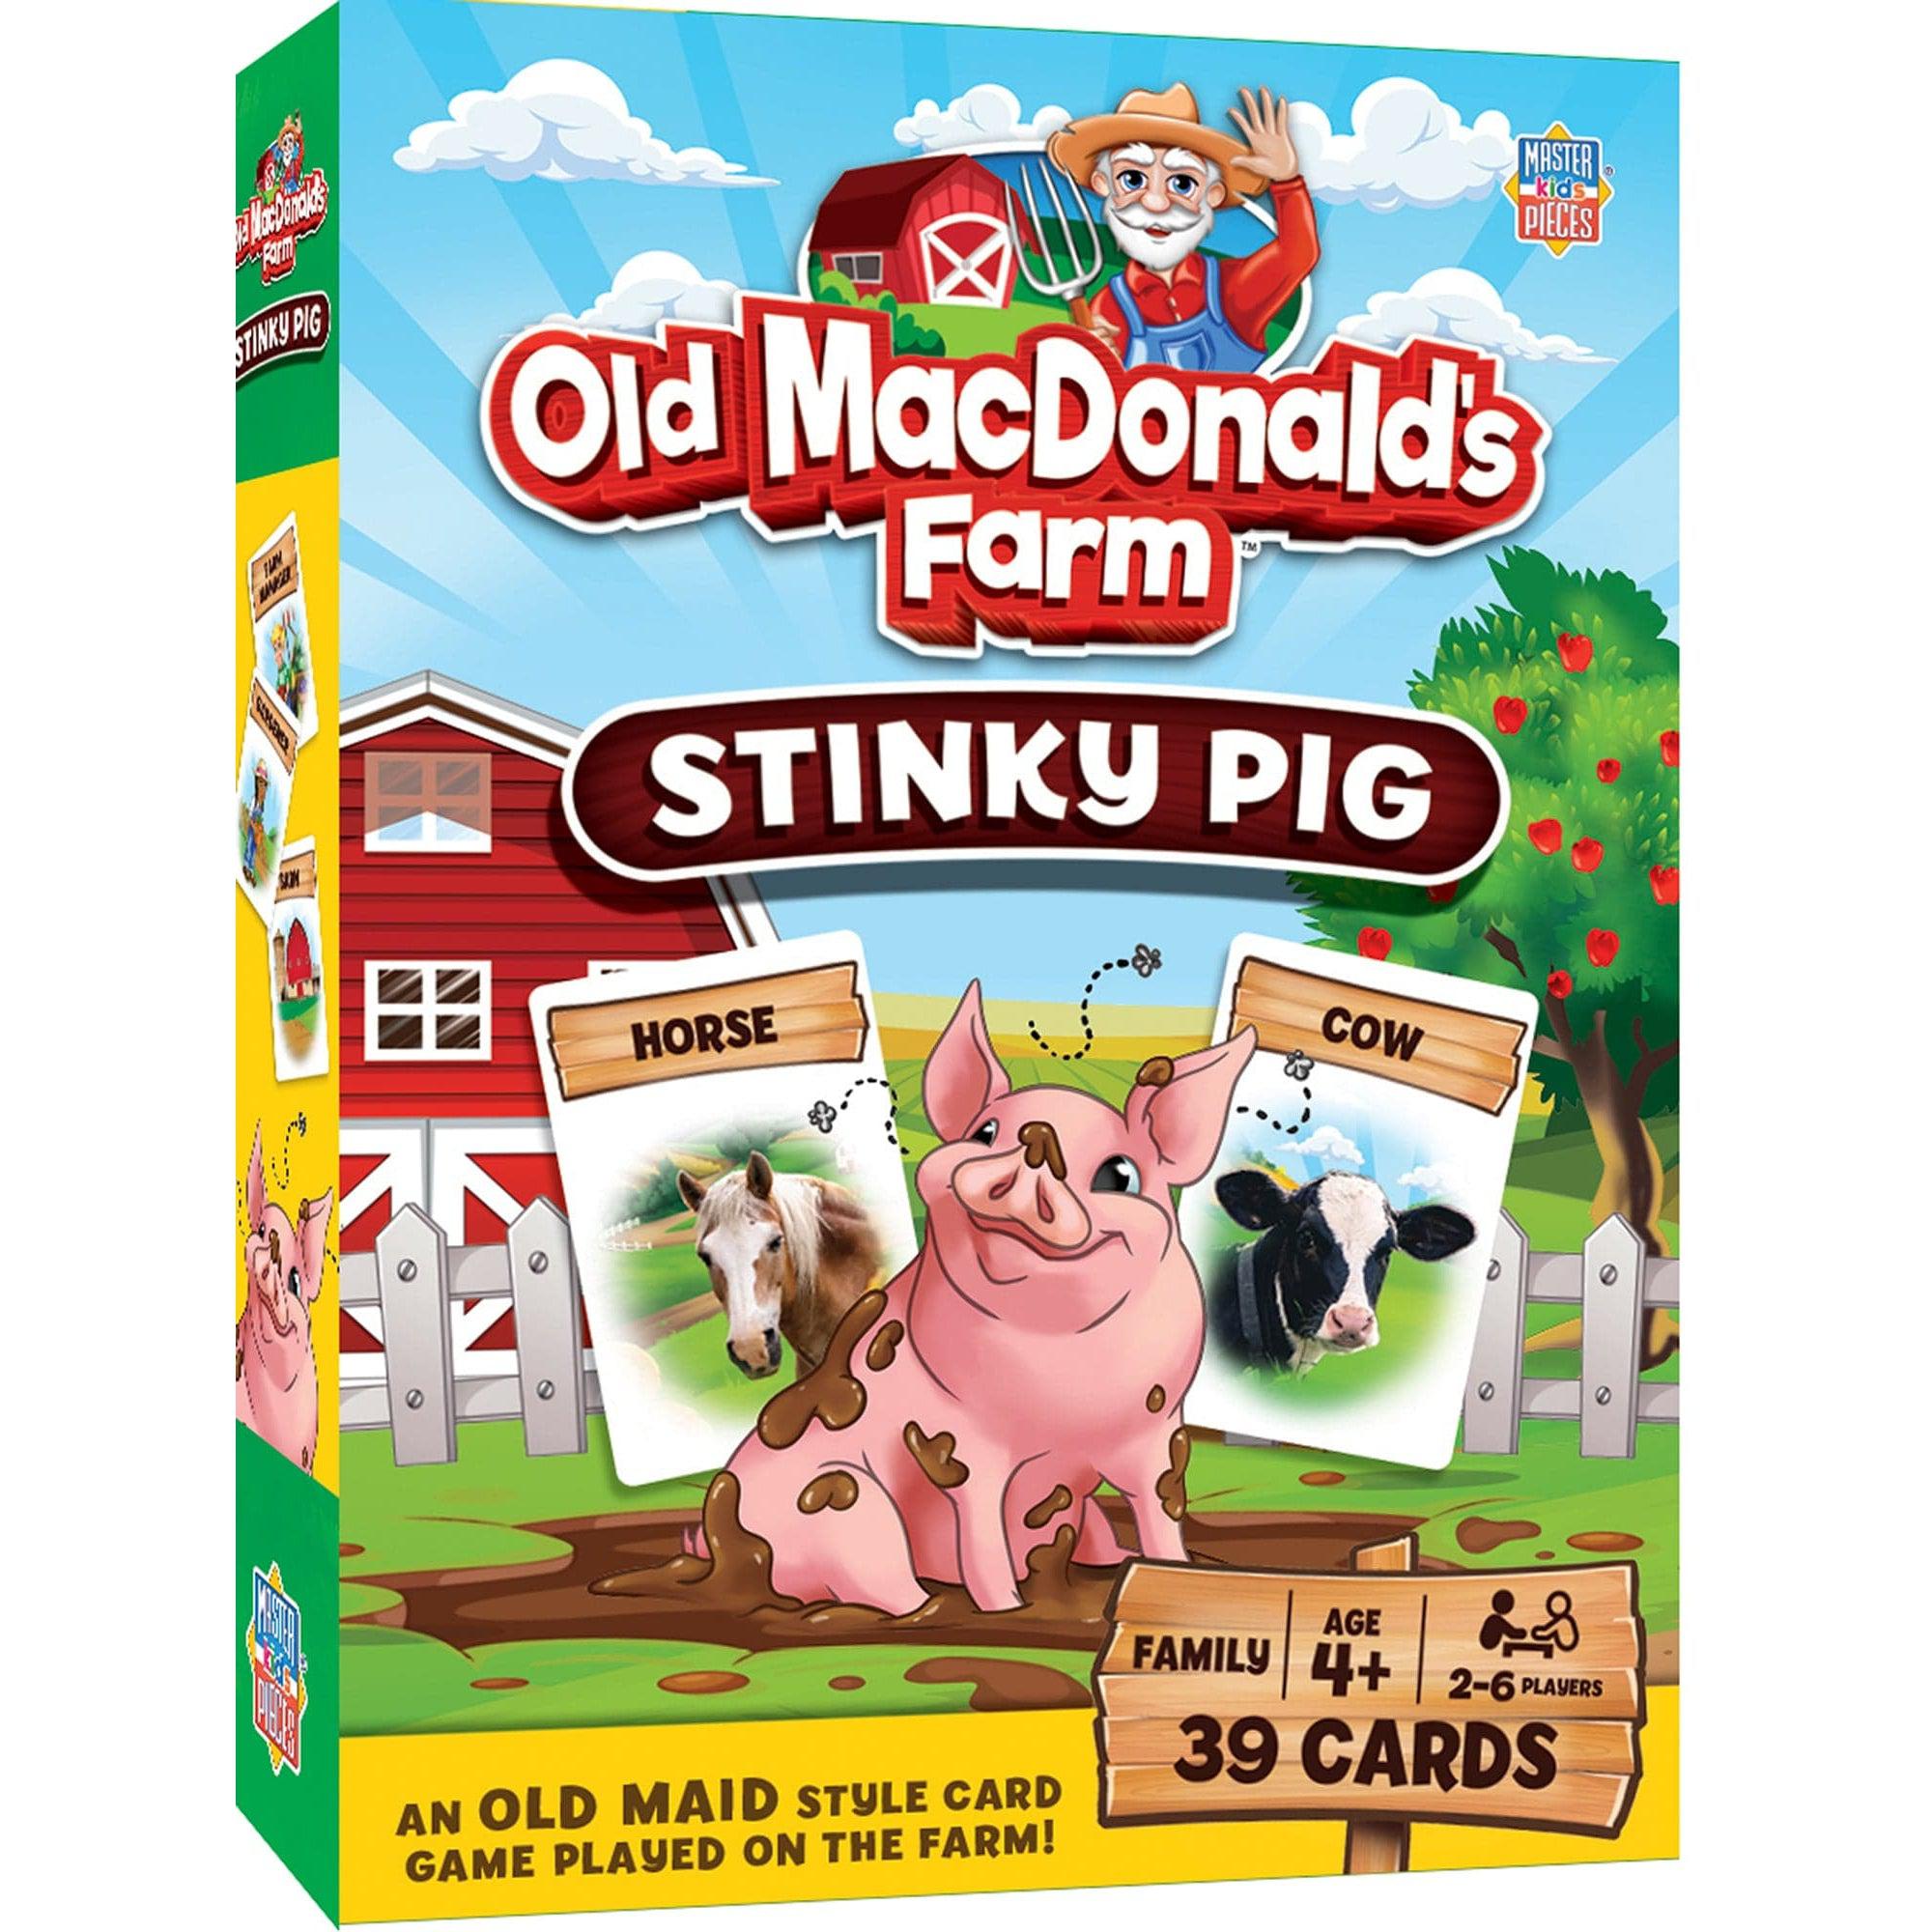 MasterPieces-Old McDonald's Farm - Stinky Pig Game-42223-Legacy Toys